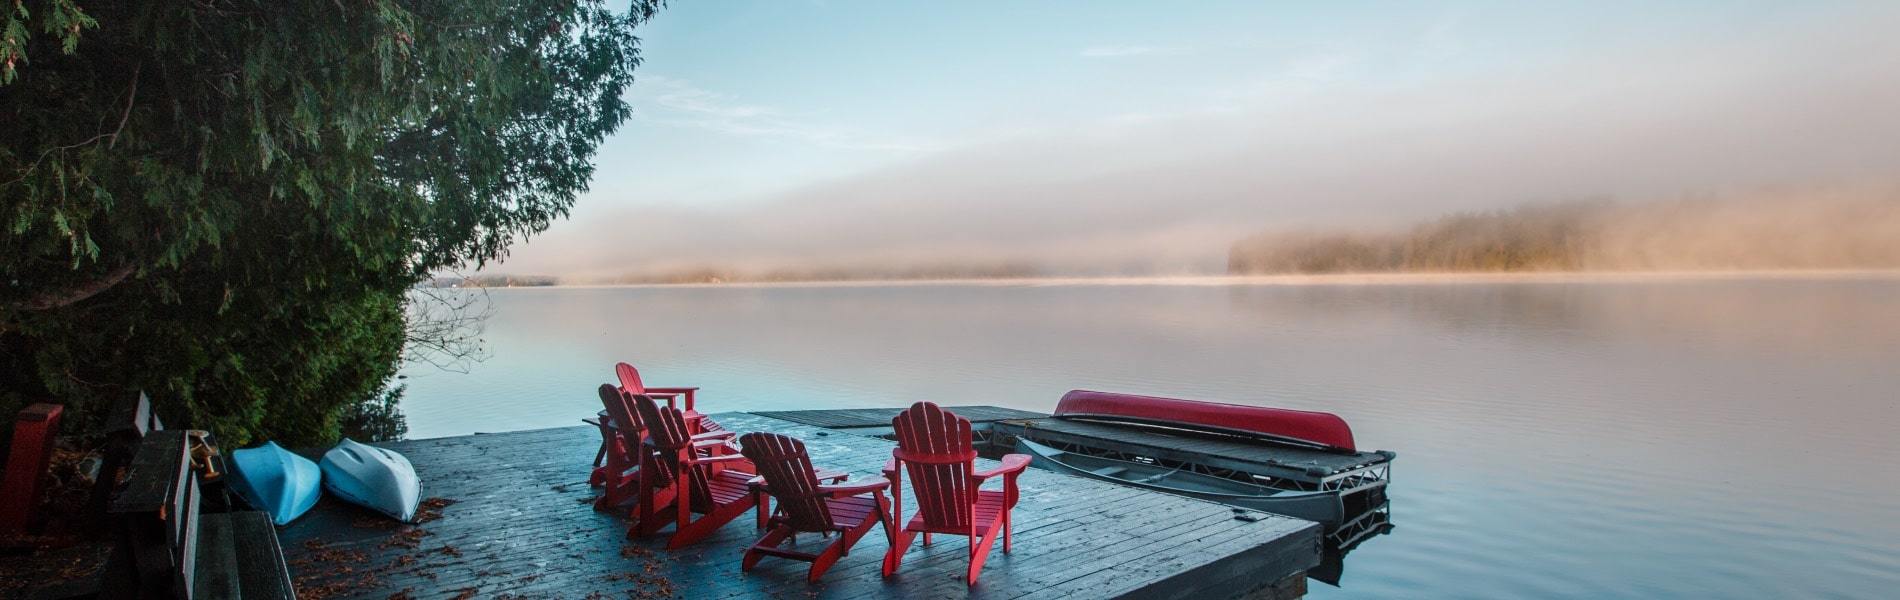 View of muskoka chairs looking out over an Ontario lake